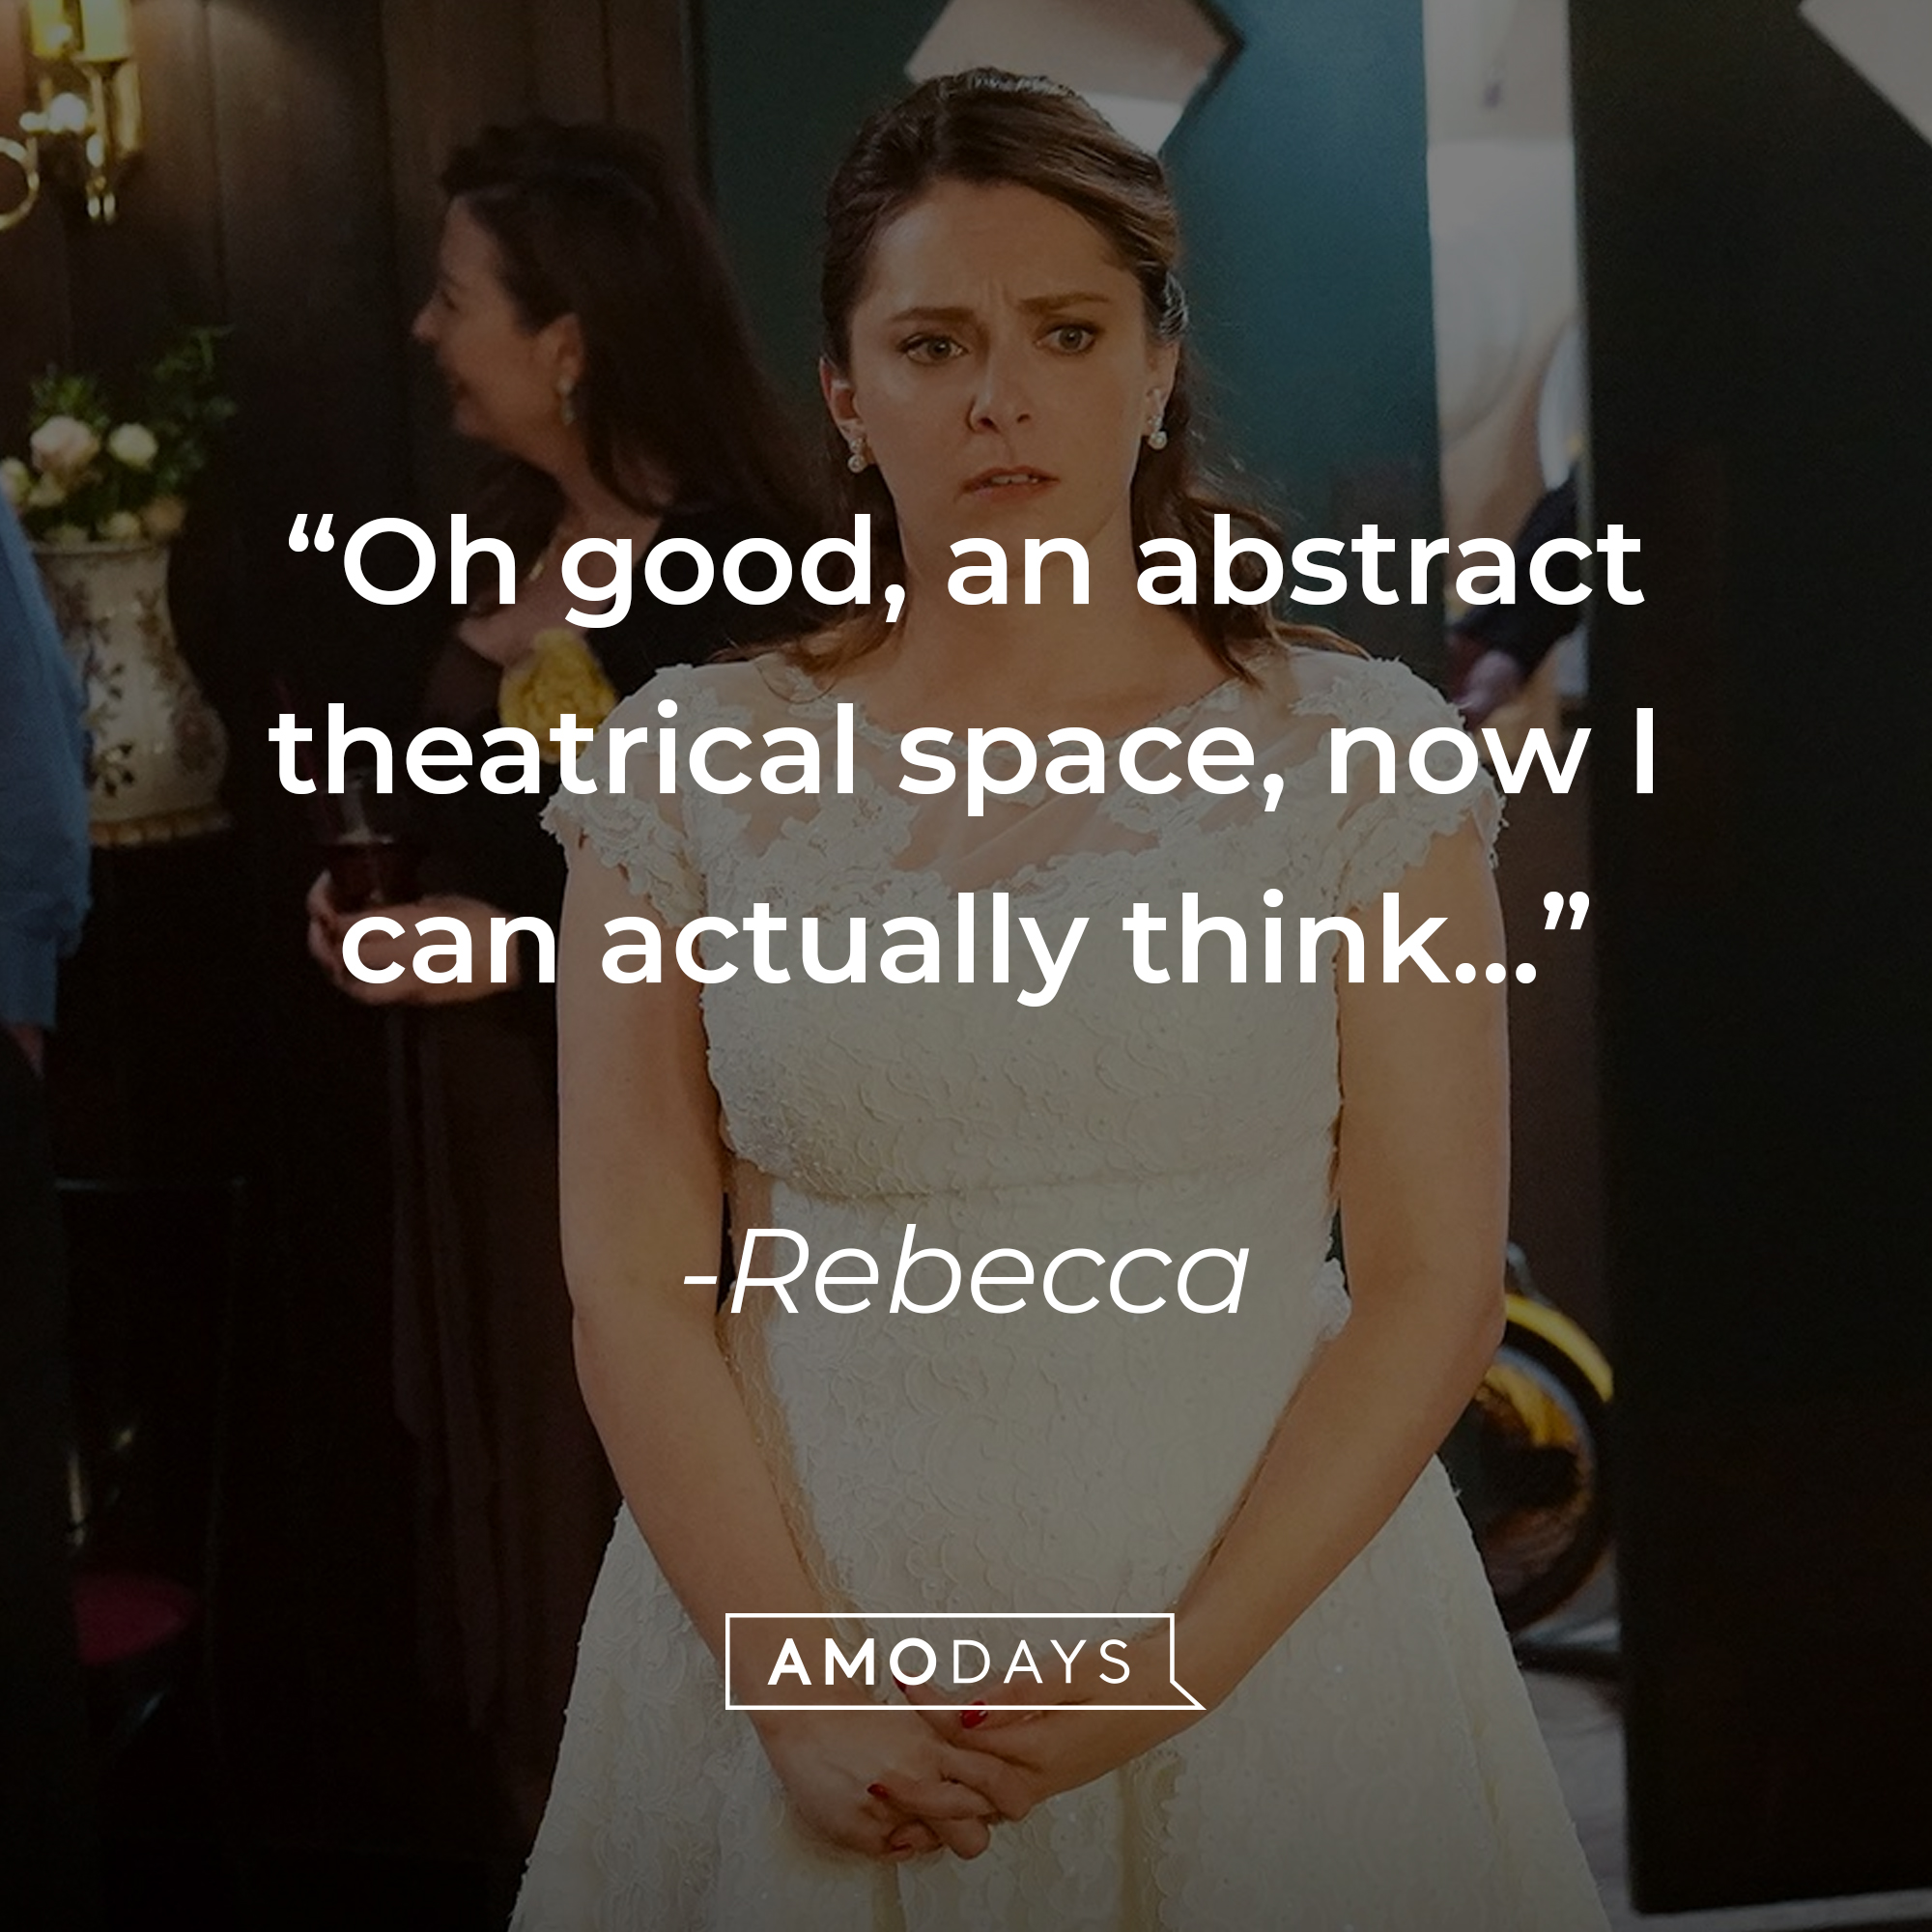 Rebecca, with her quote:“Oh good, an abstract theatrical space, now I can actually think…” | Source: facebook.com/crazyxgf